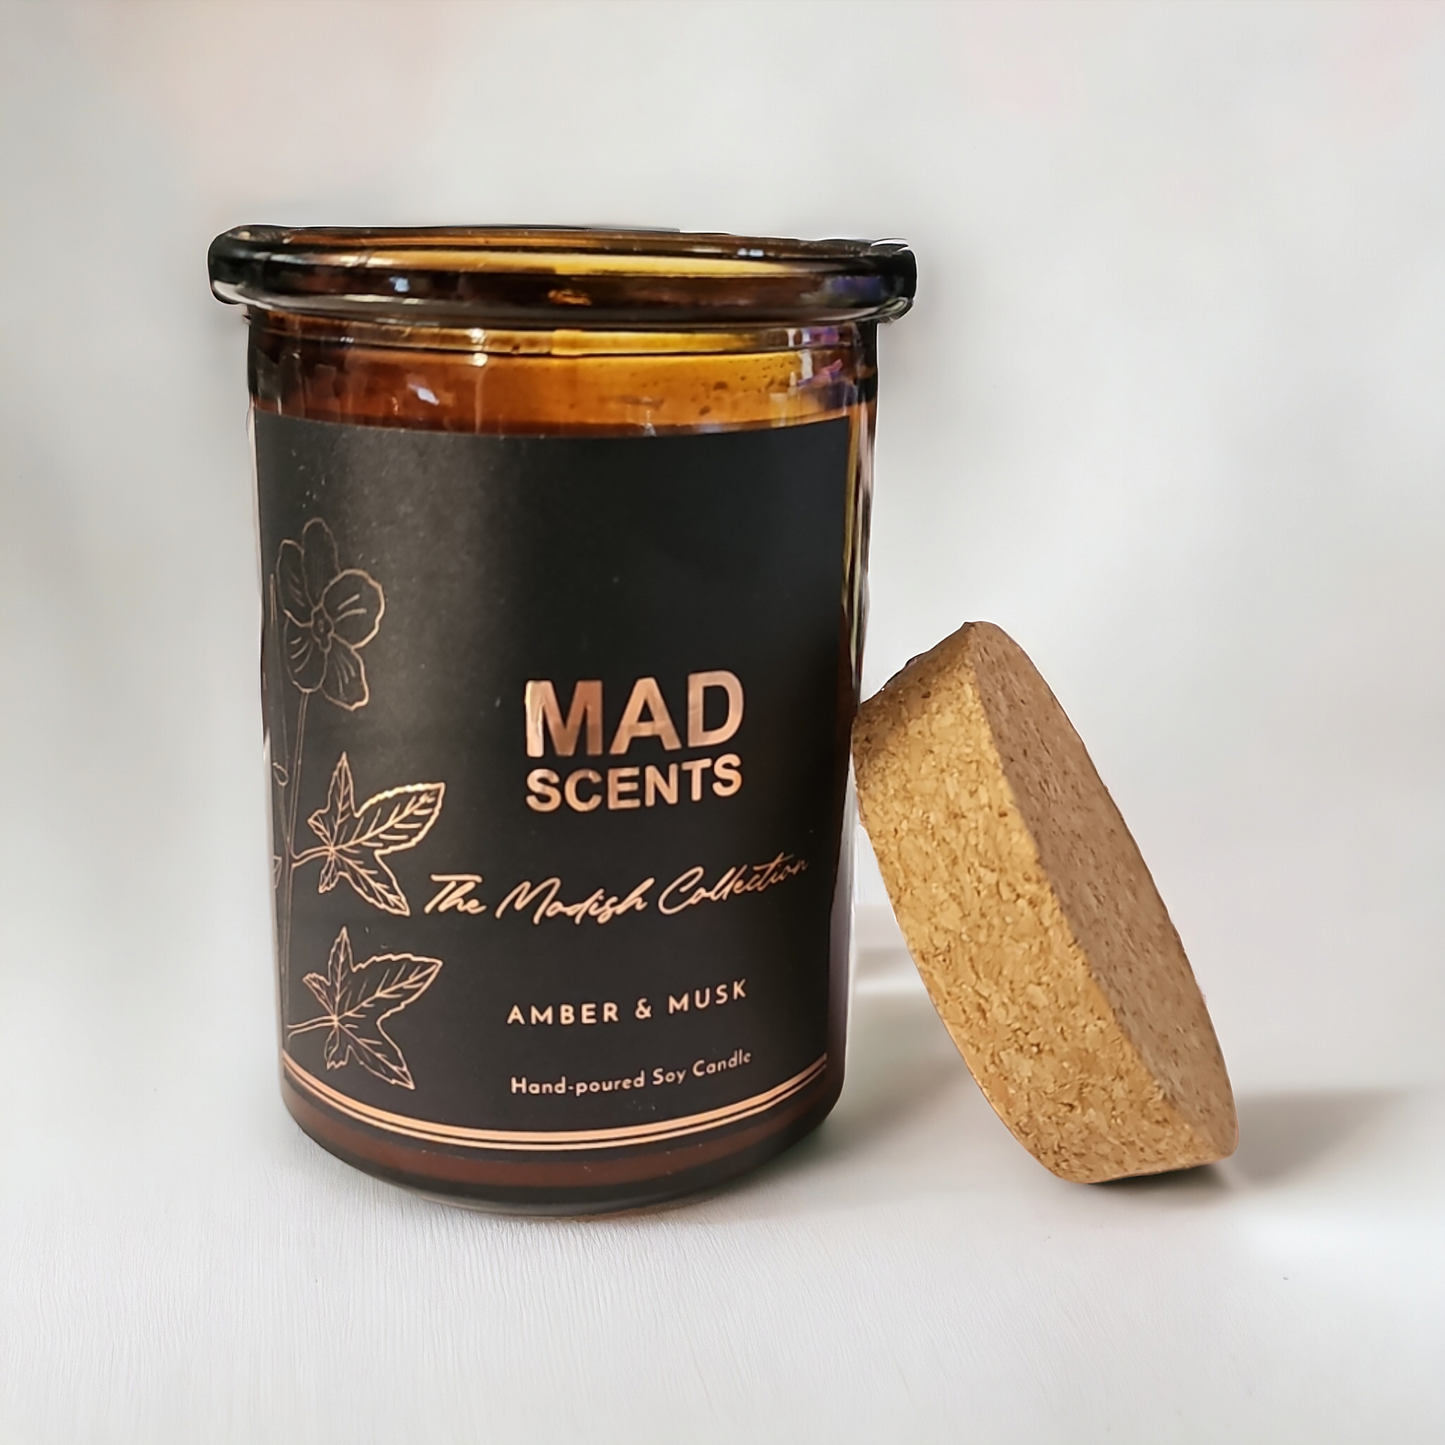 Amber & Musk Province Candle